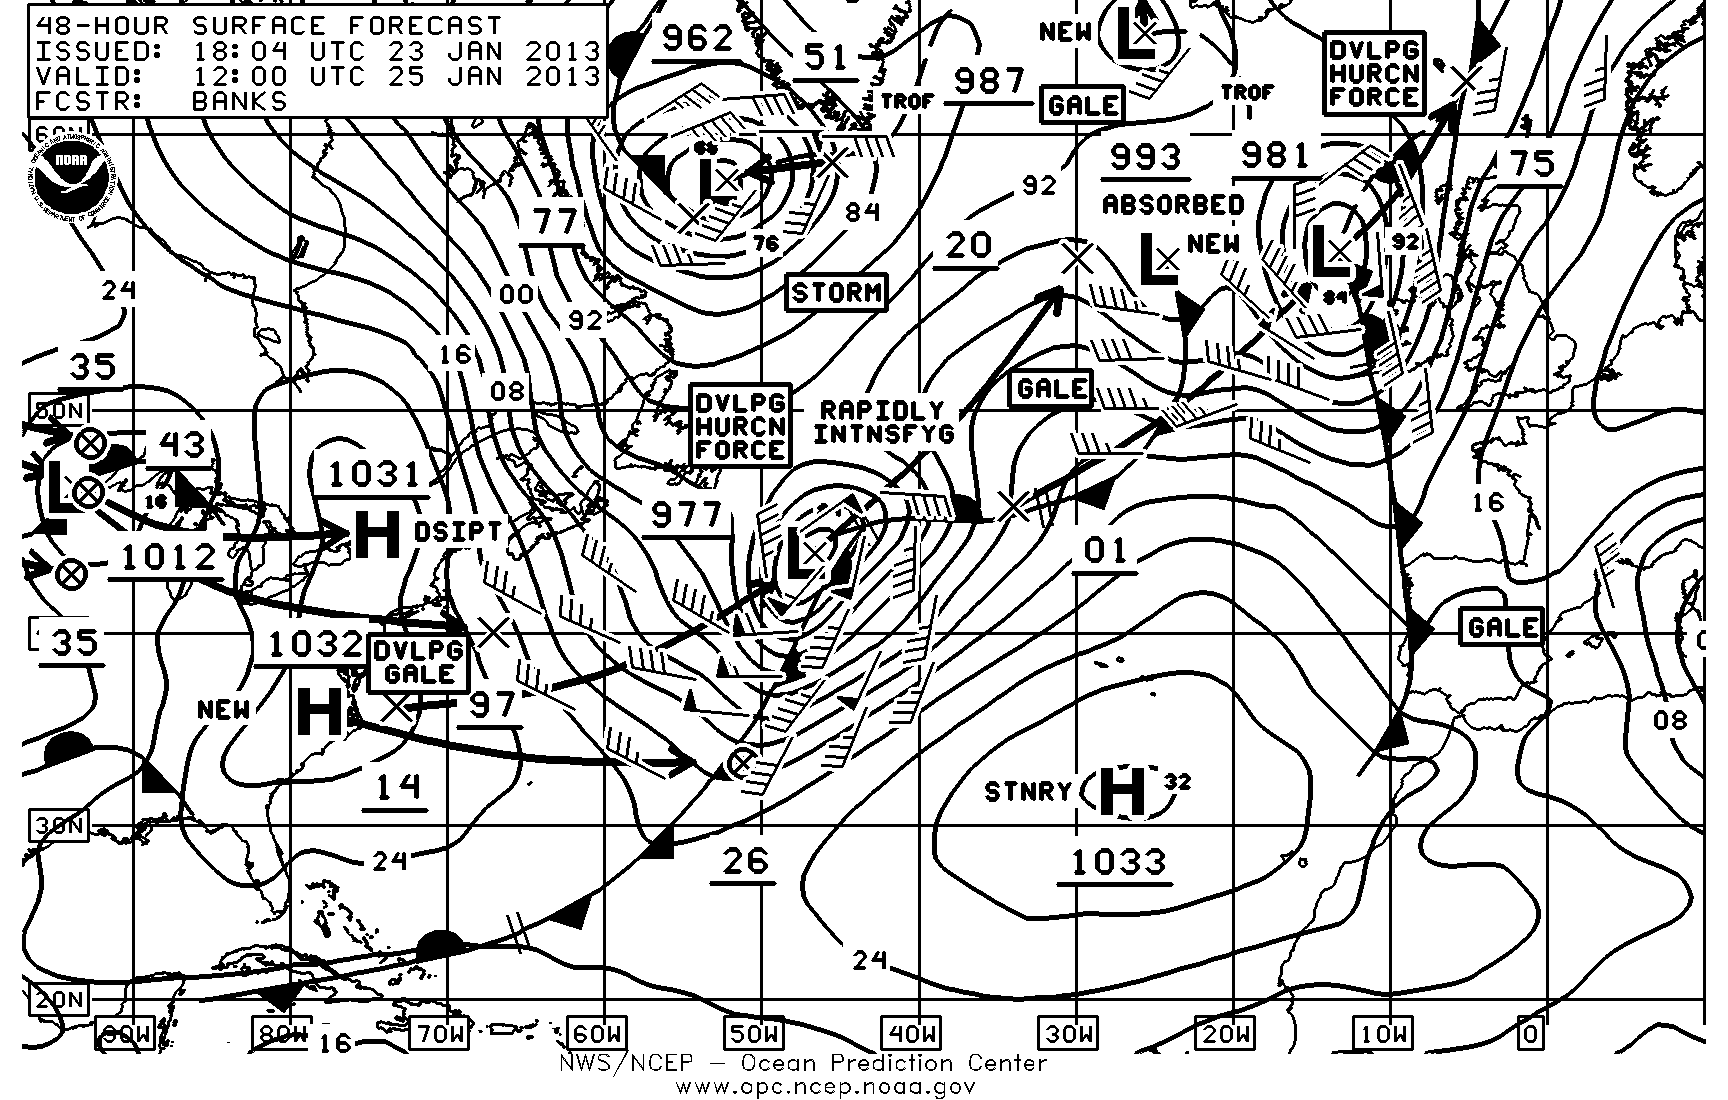 Historic North Atlantic Storm On Track for Saturday – UPDATE